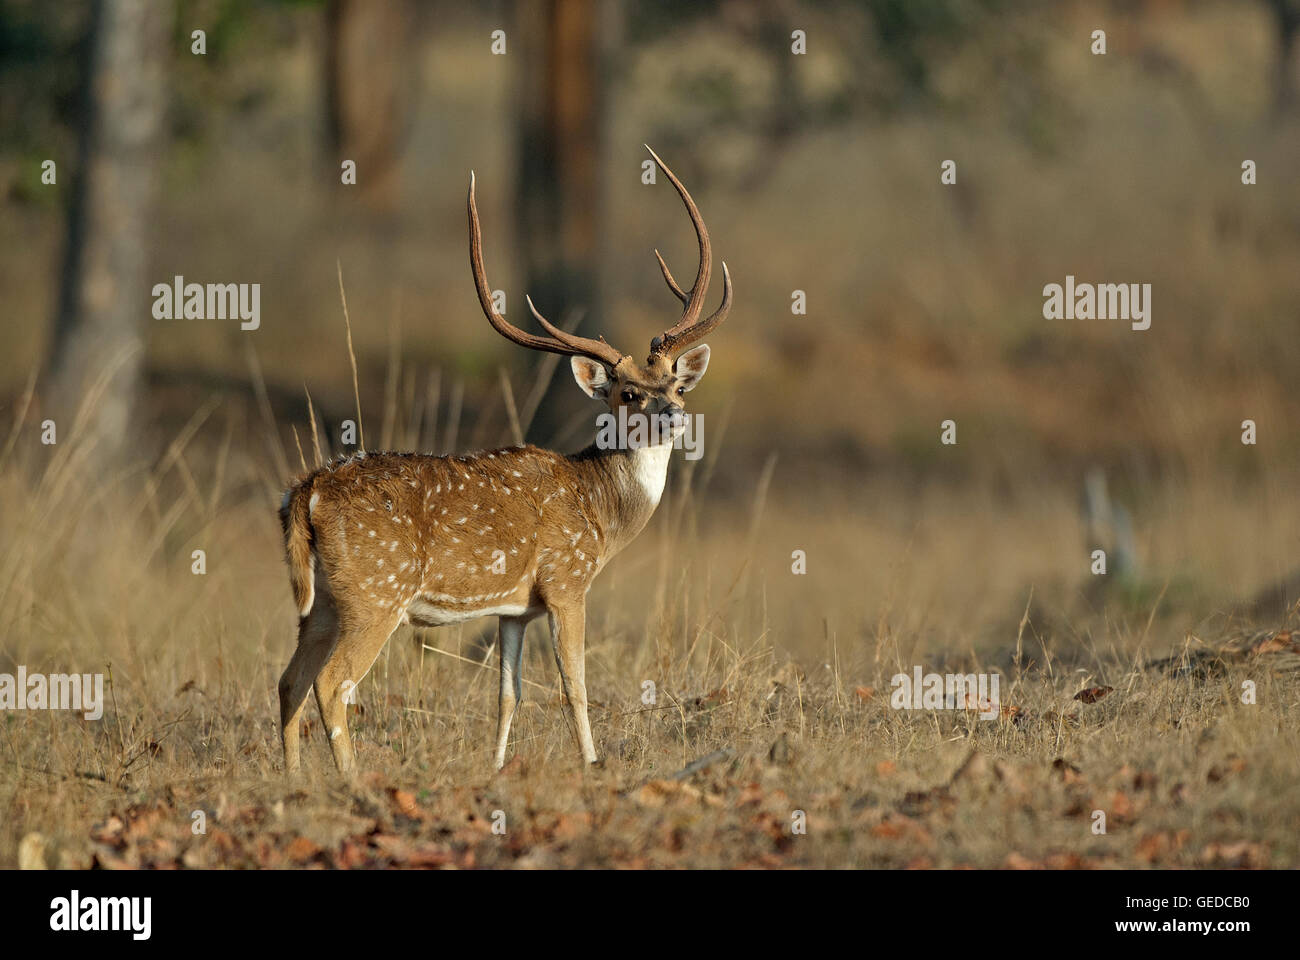 The image of Spotted deer ( Axis axis ) was taken in Bandavgarh national park, India Stock Photo